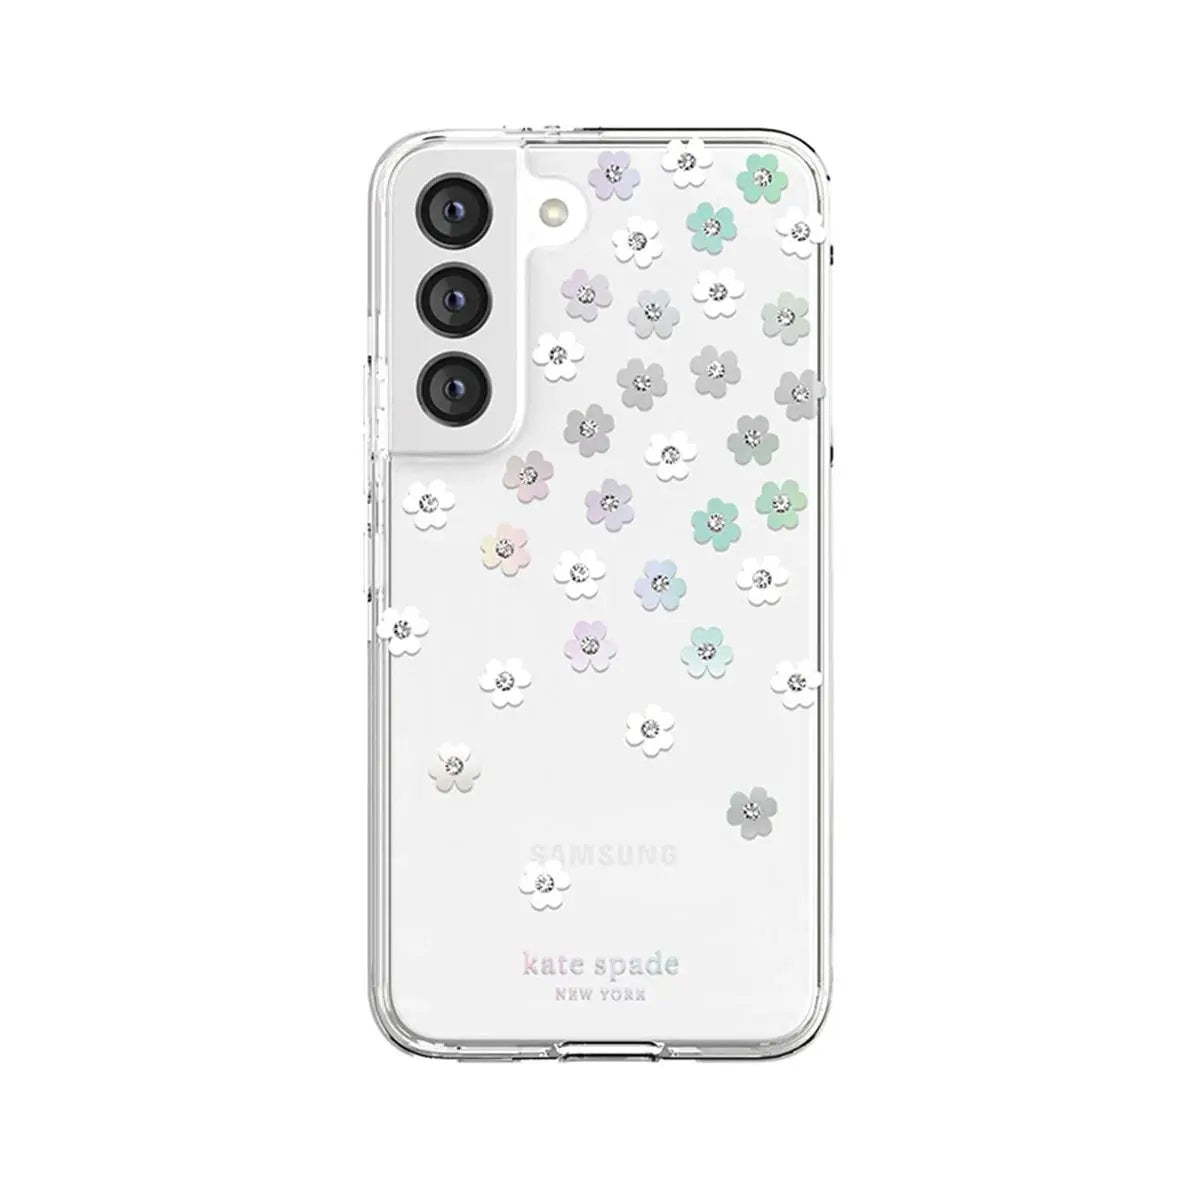 Kate Spade New York Defensive Hardshell Case for Samsung Galaxy S22 Series (Scattered Flowers)